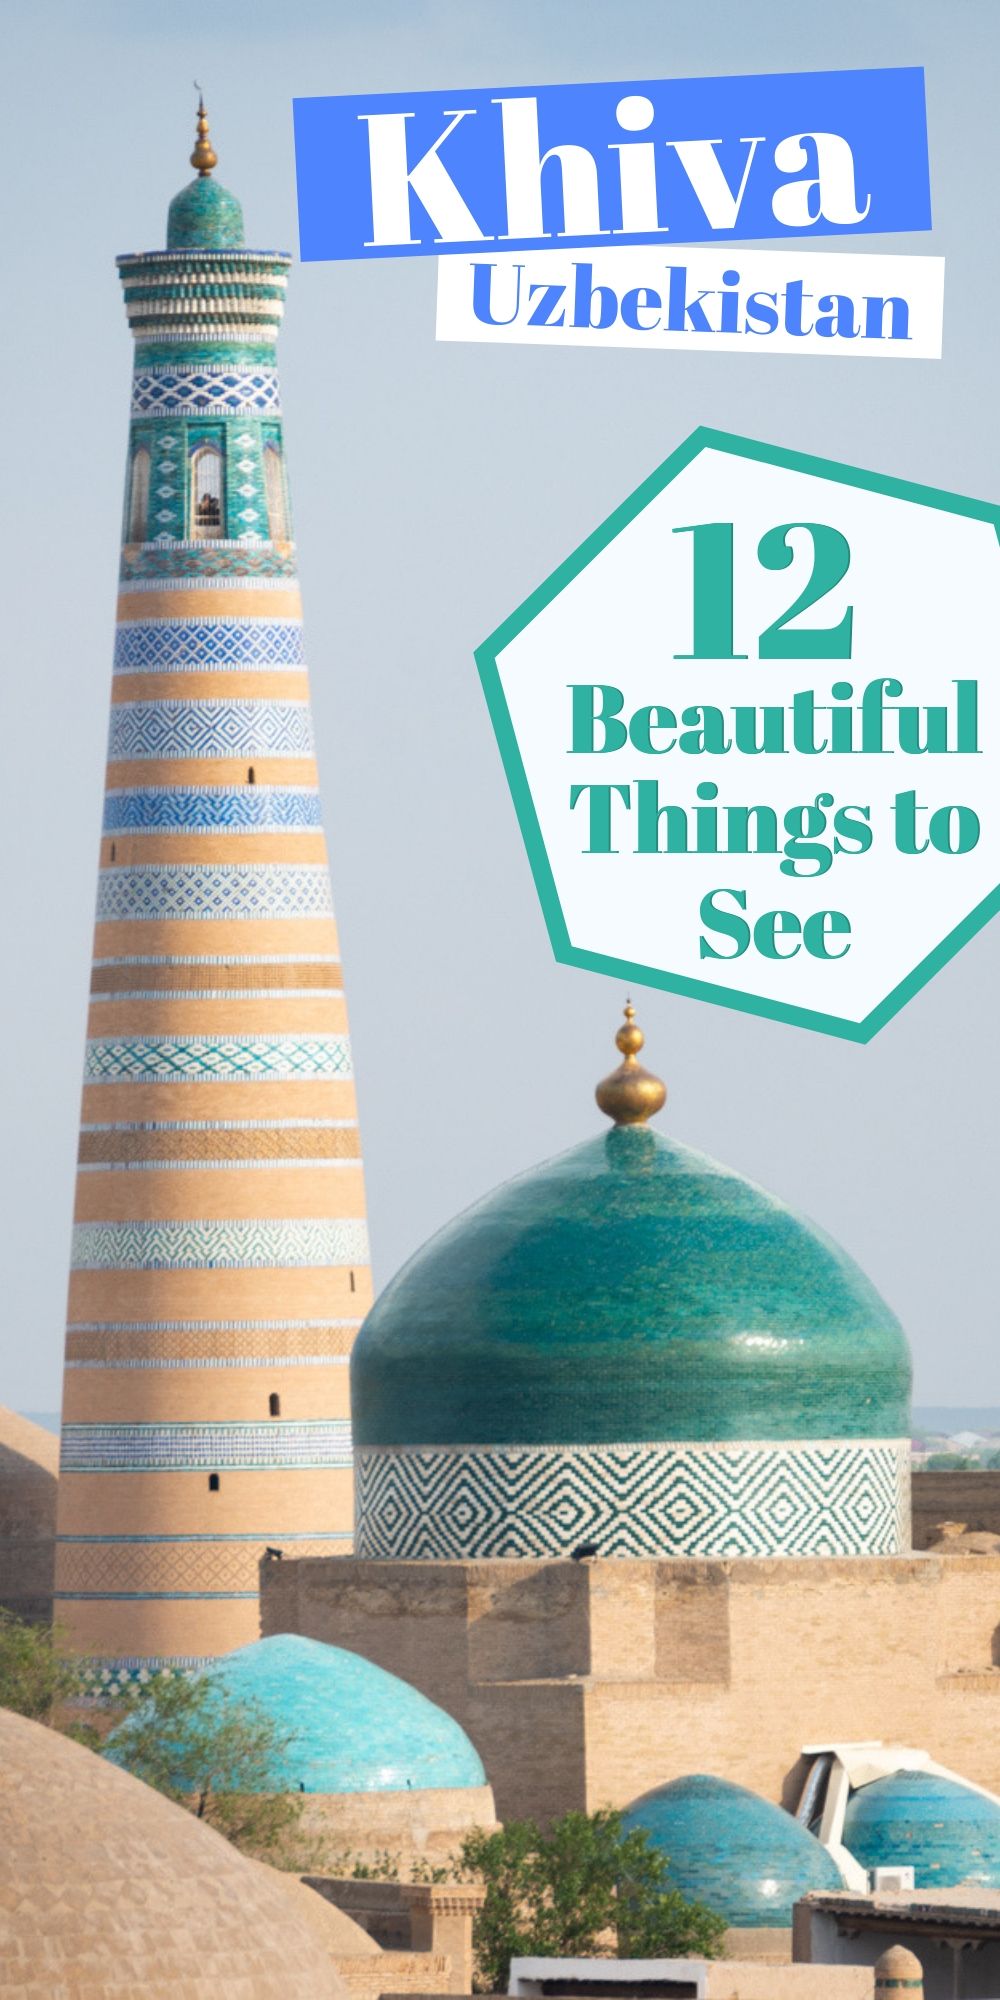 Khiva, Uzbekistan: Top Things to See and Do